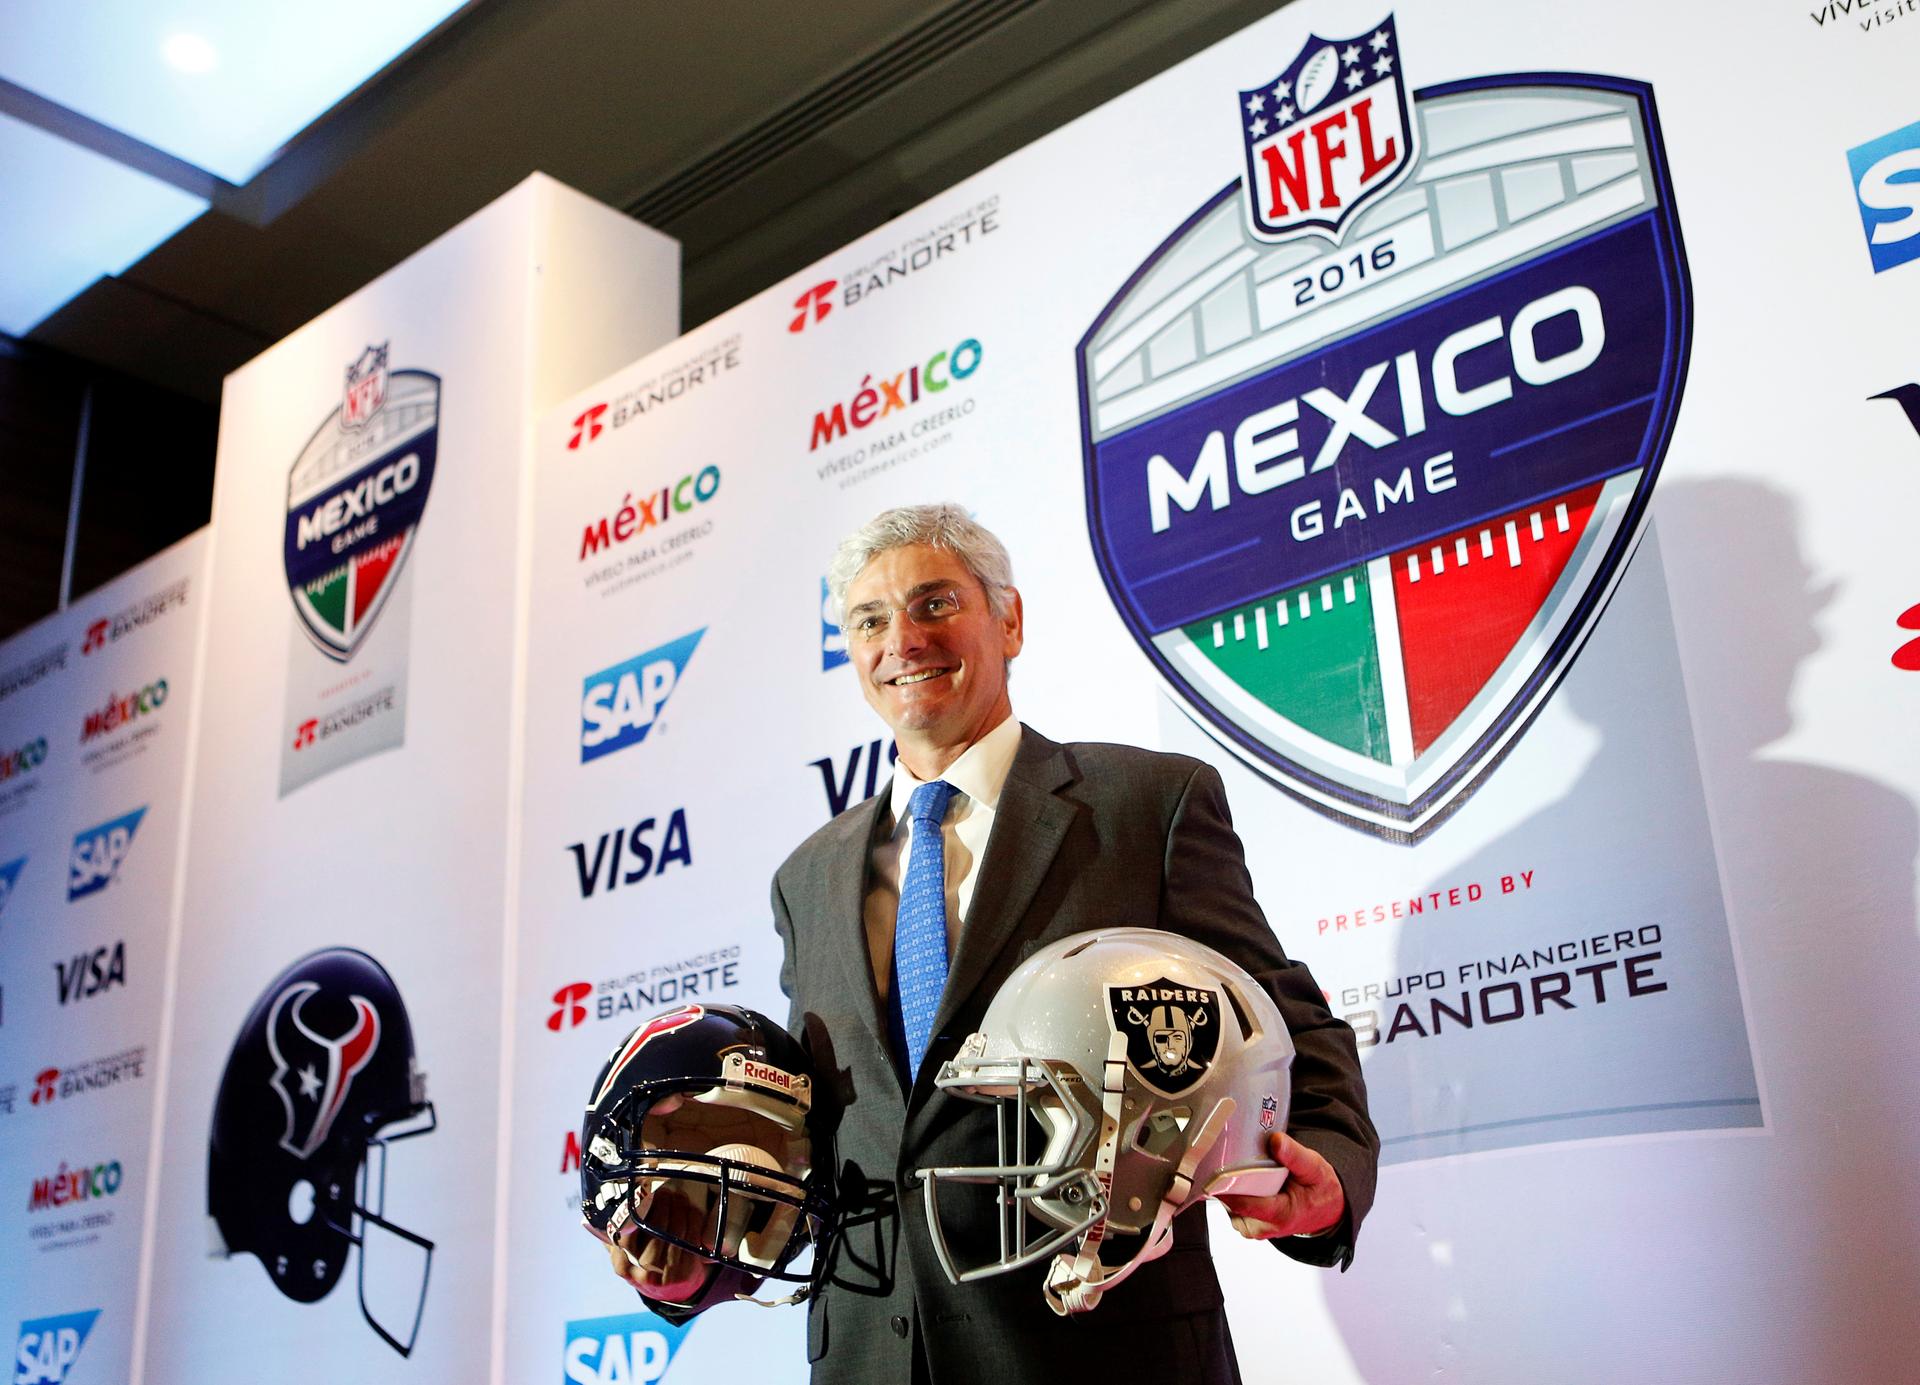 Representative of the National Football League (NFL) Arturo Oliver shows football helmets to the media to promote the regular season game between Houston Texans and Oakland Raiders, in Mexico City, Mexico July 19, 2016.